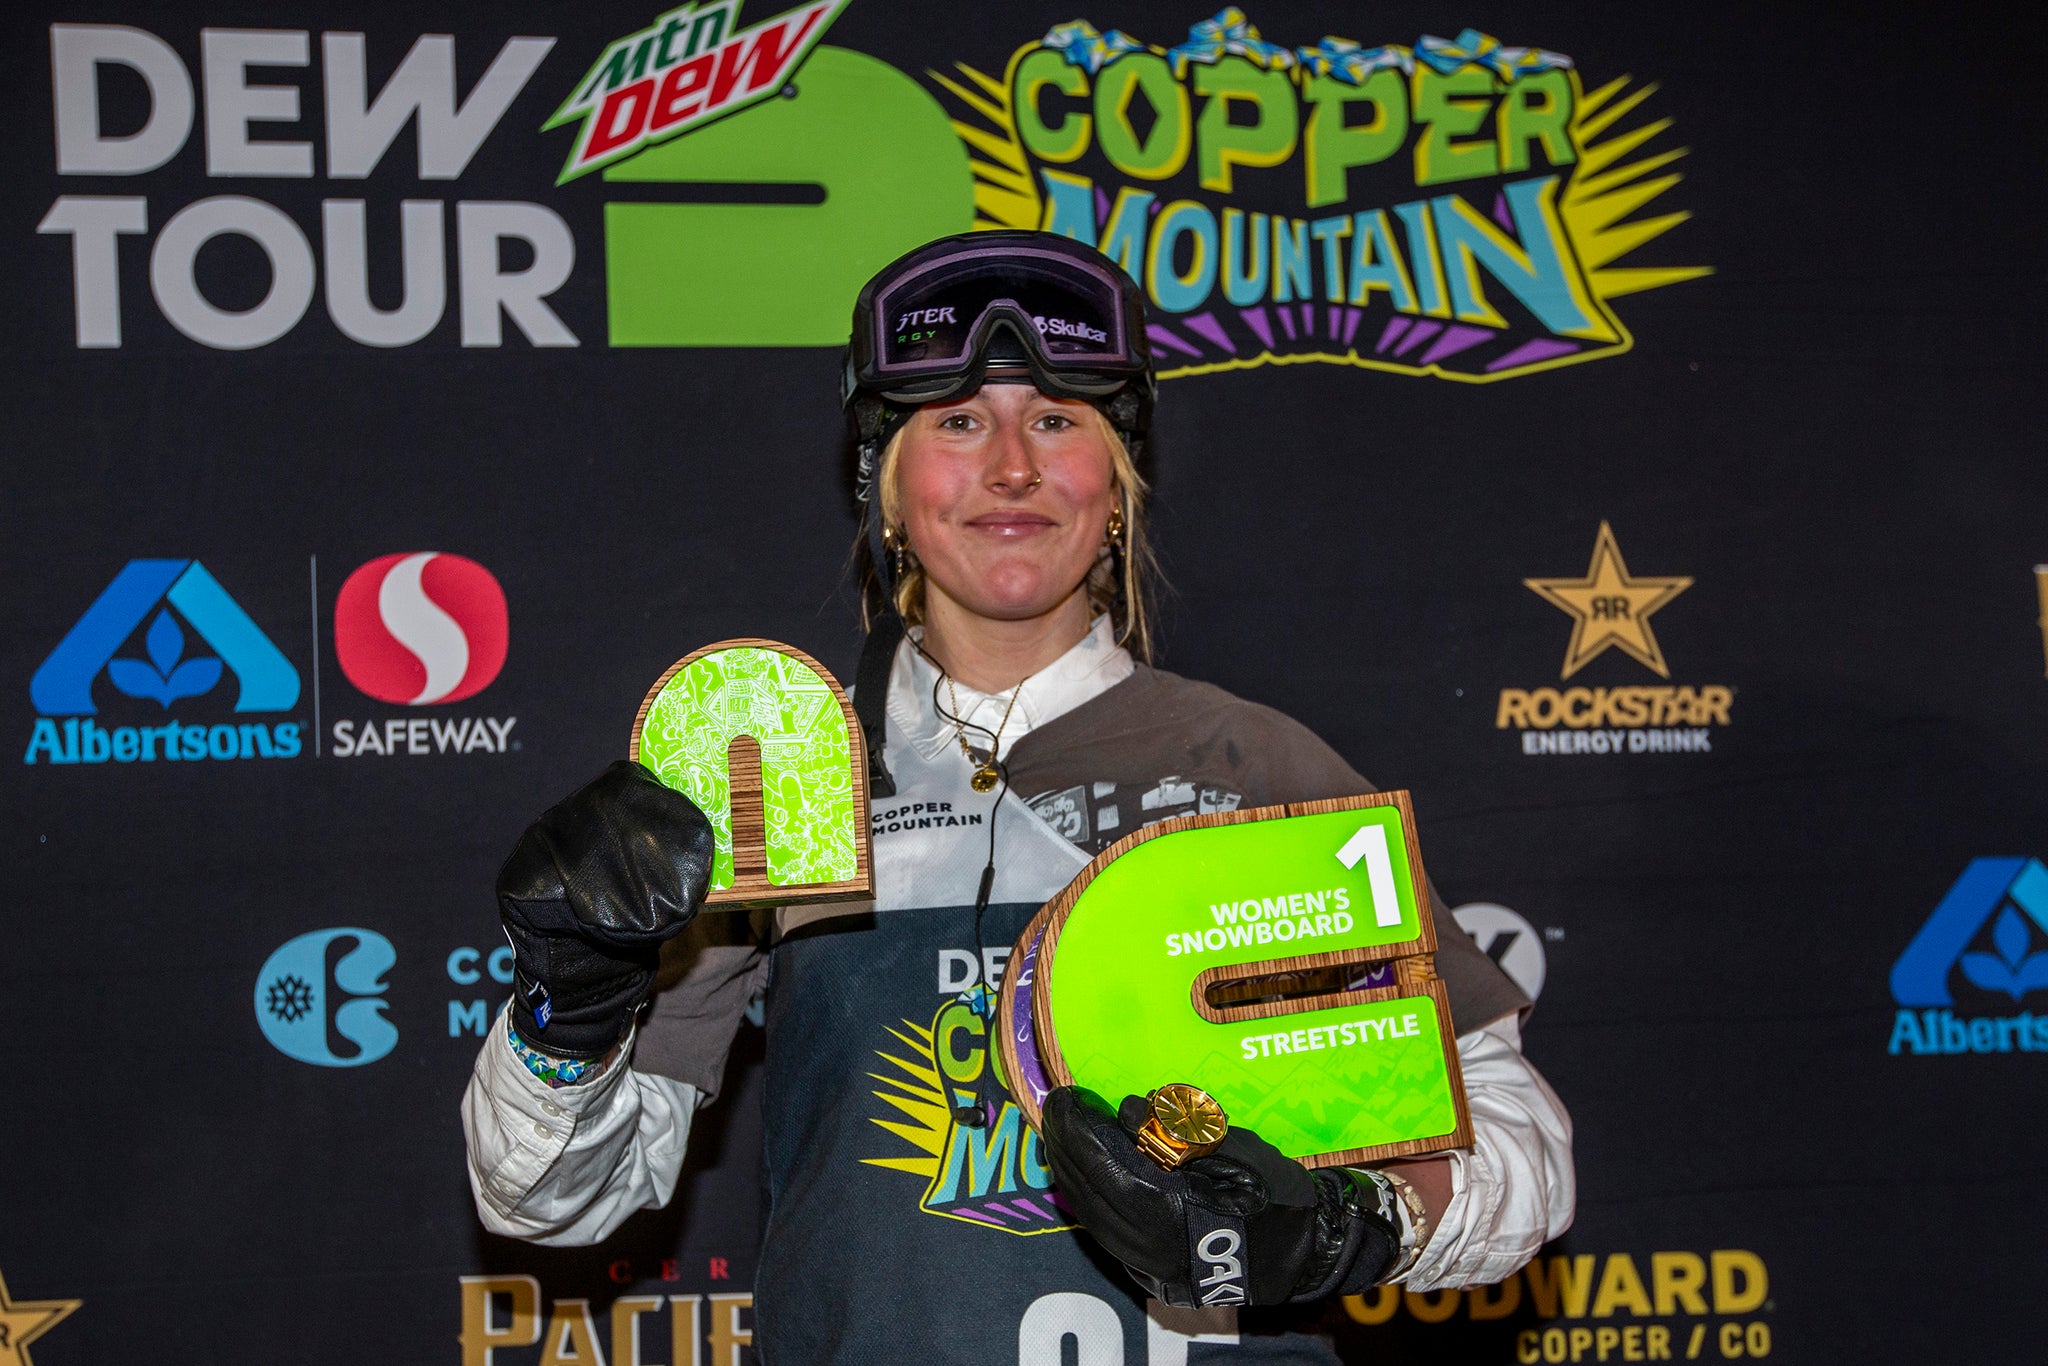 Big winner Mia Brookes | Photo provided by Dew Tour